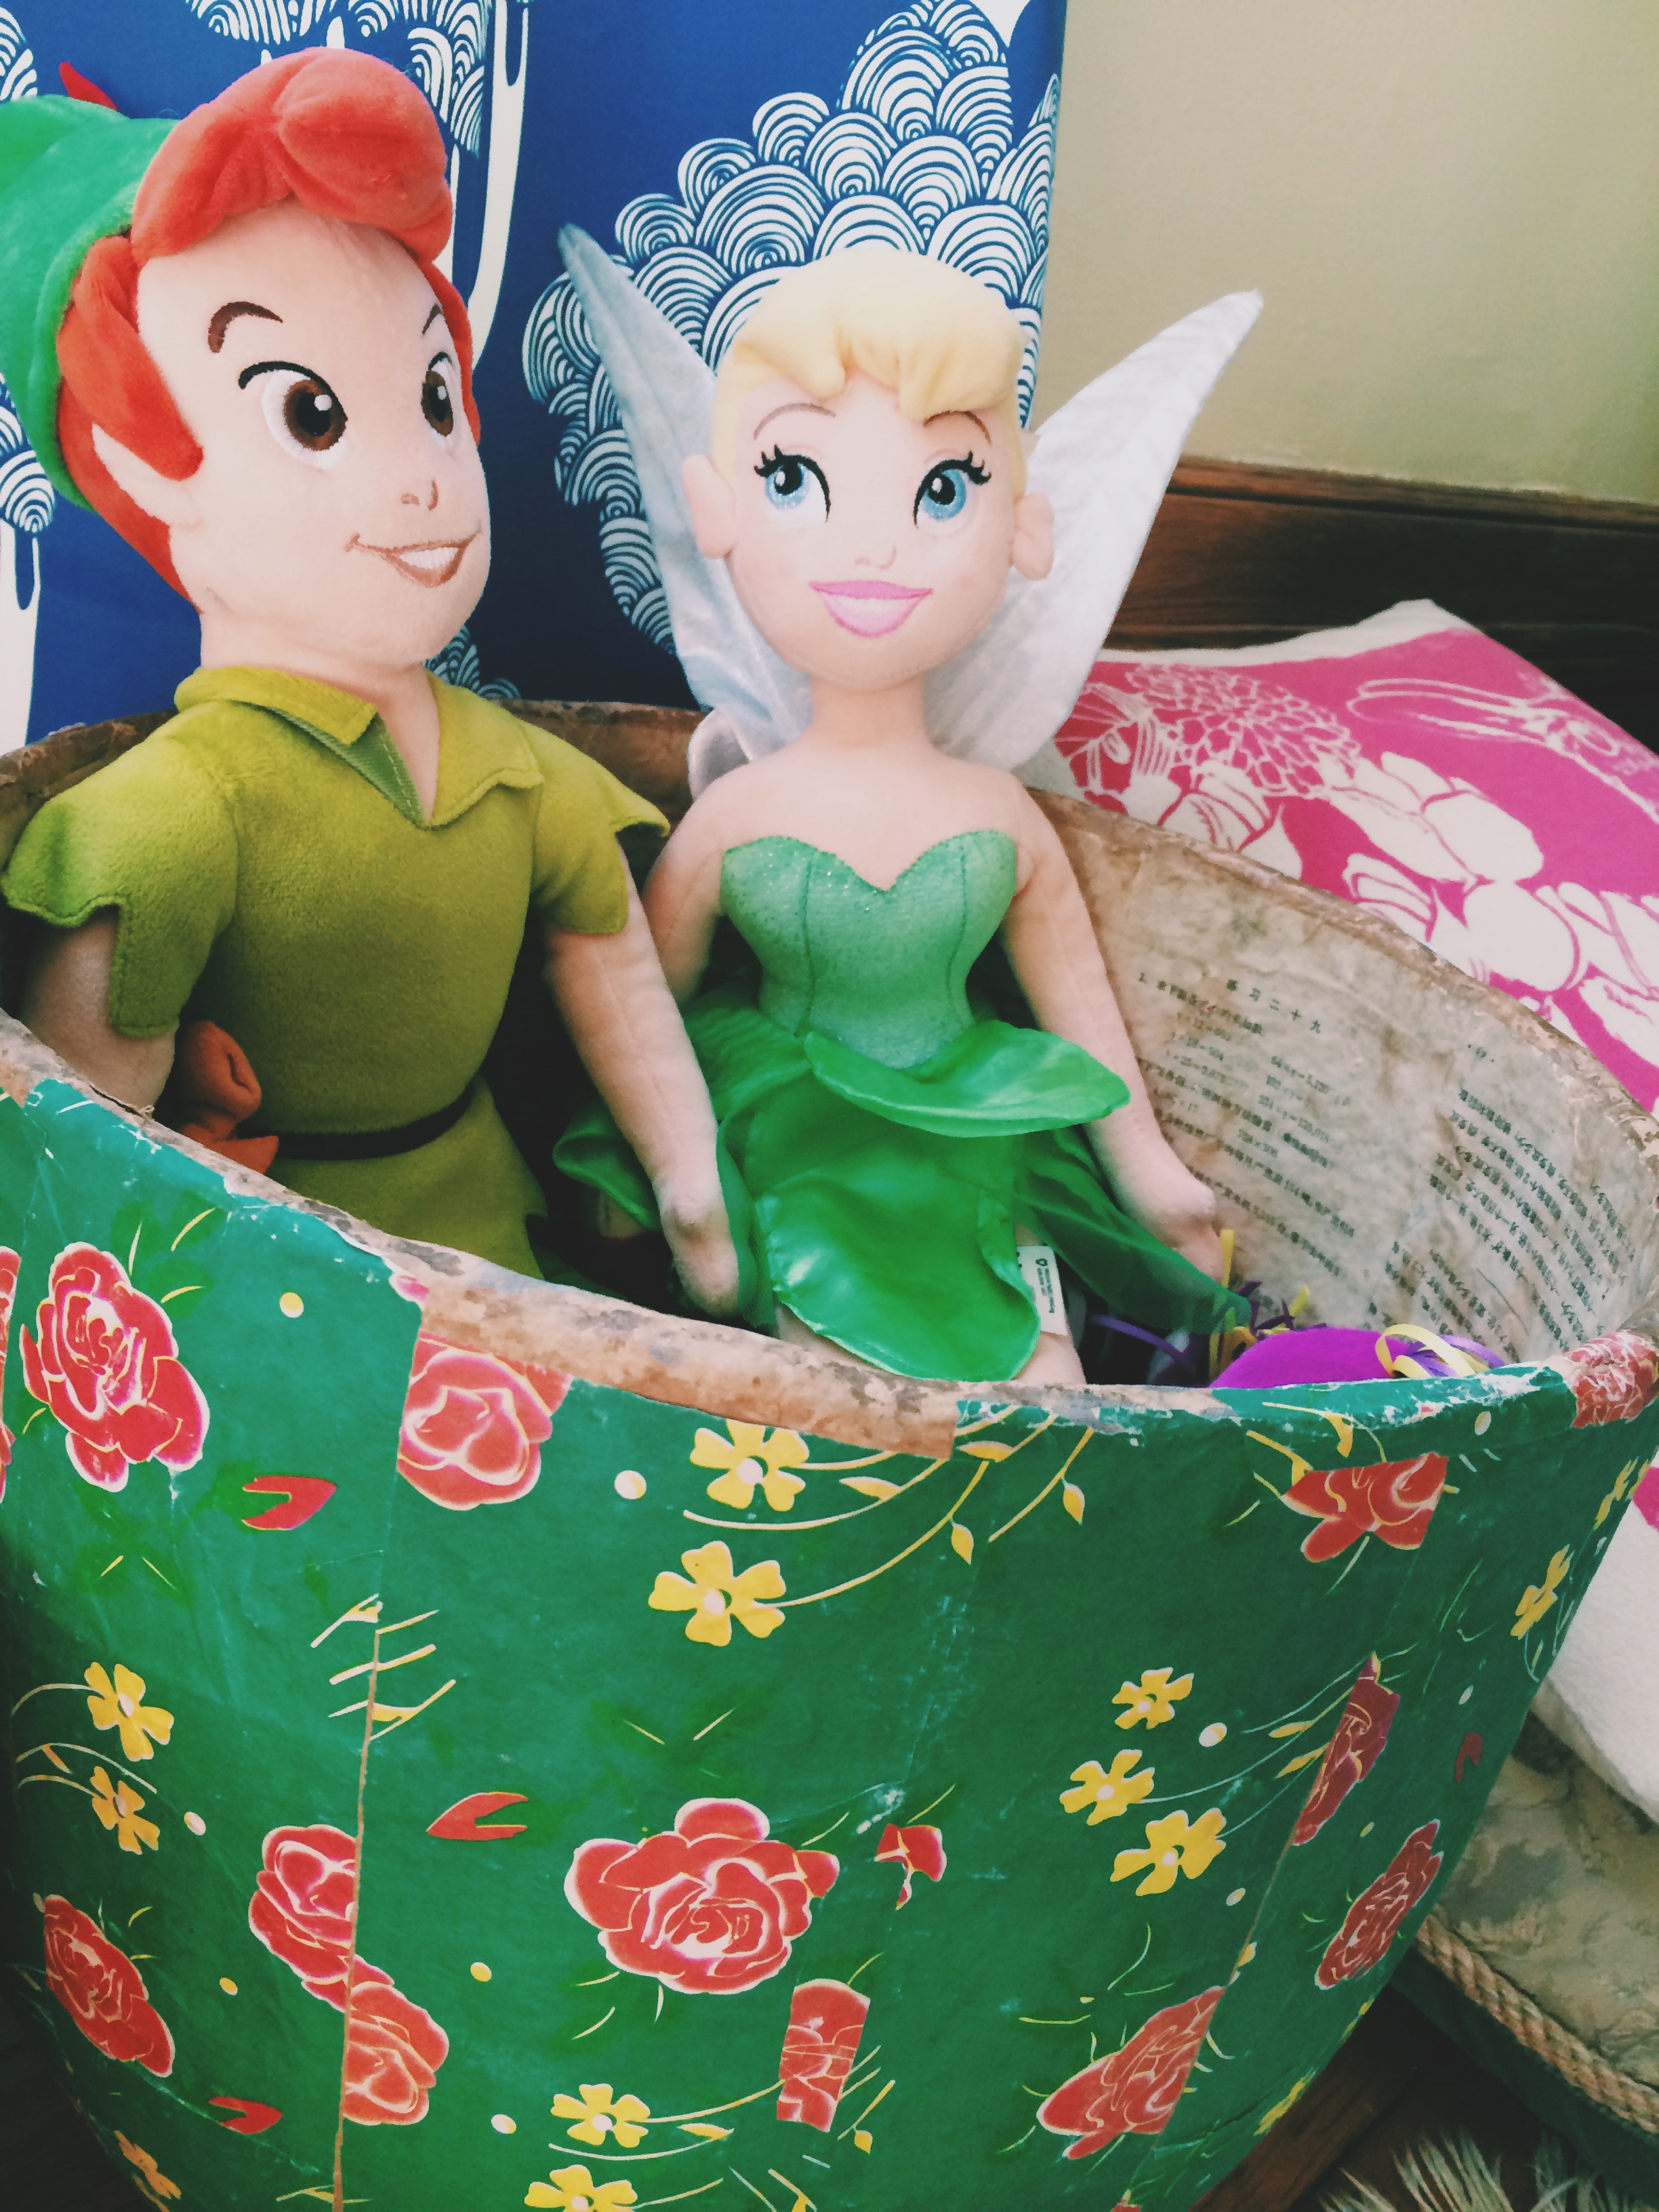  Repeat after me...toy storage can be beautiful and functional! Vintage floral basket from Shabby Chic. Rabbit pillow from Erin Flett for my husband's mother "Bunny" who watches over us. Tinkerbell and Peter Pan because magic is very alive for both t